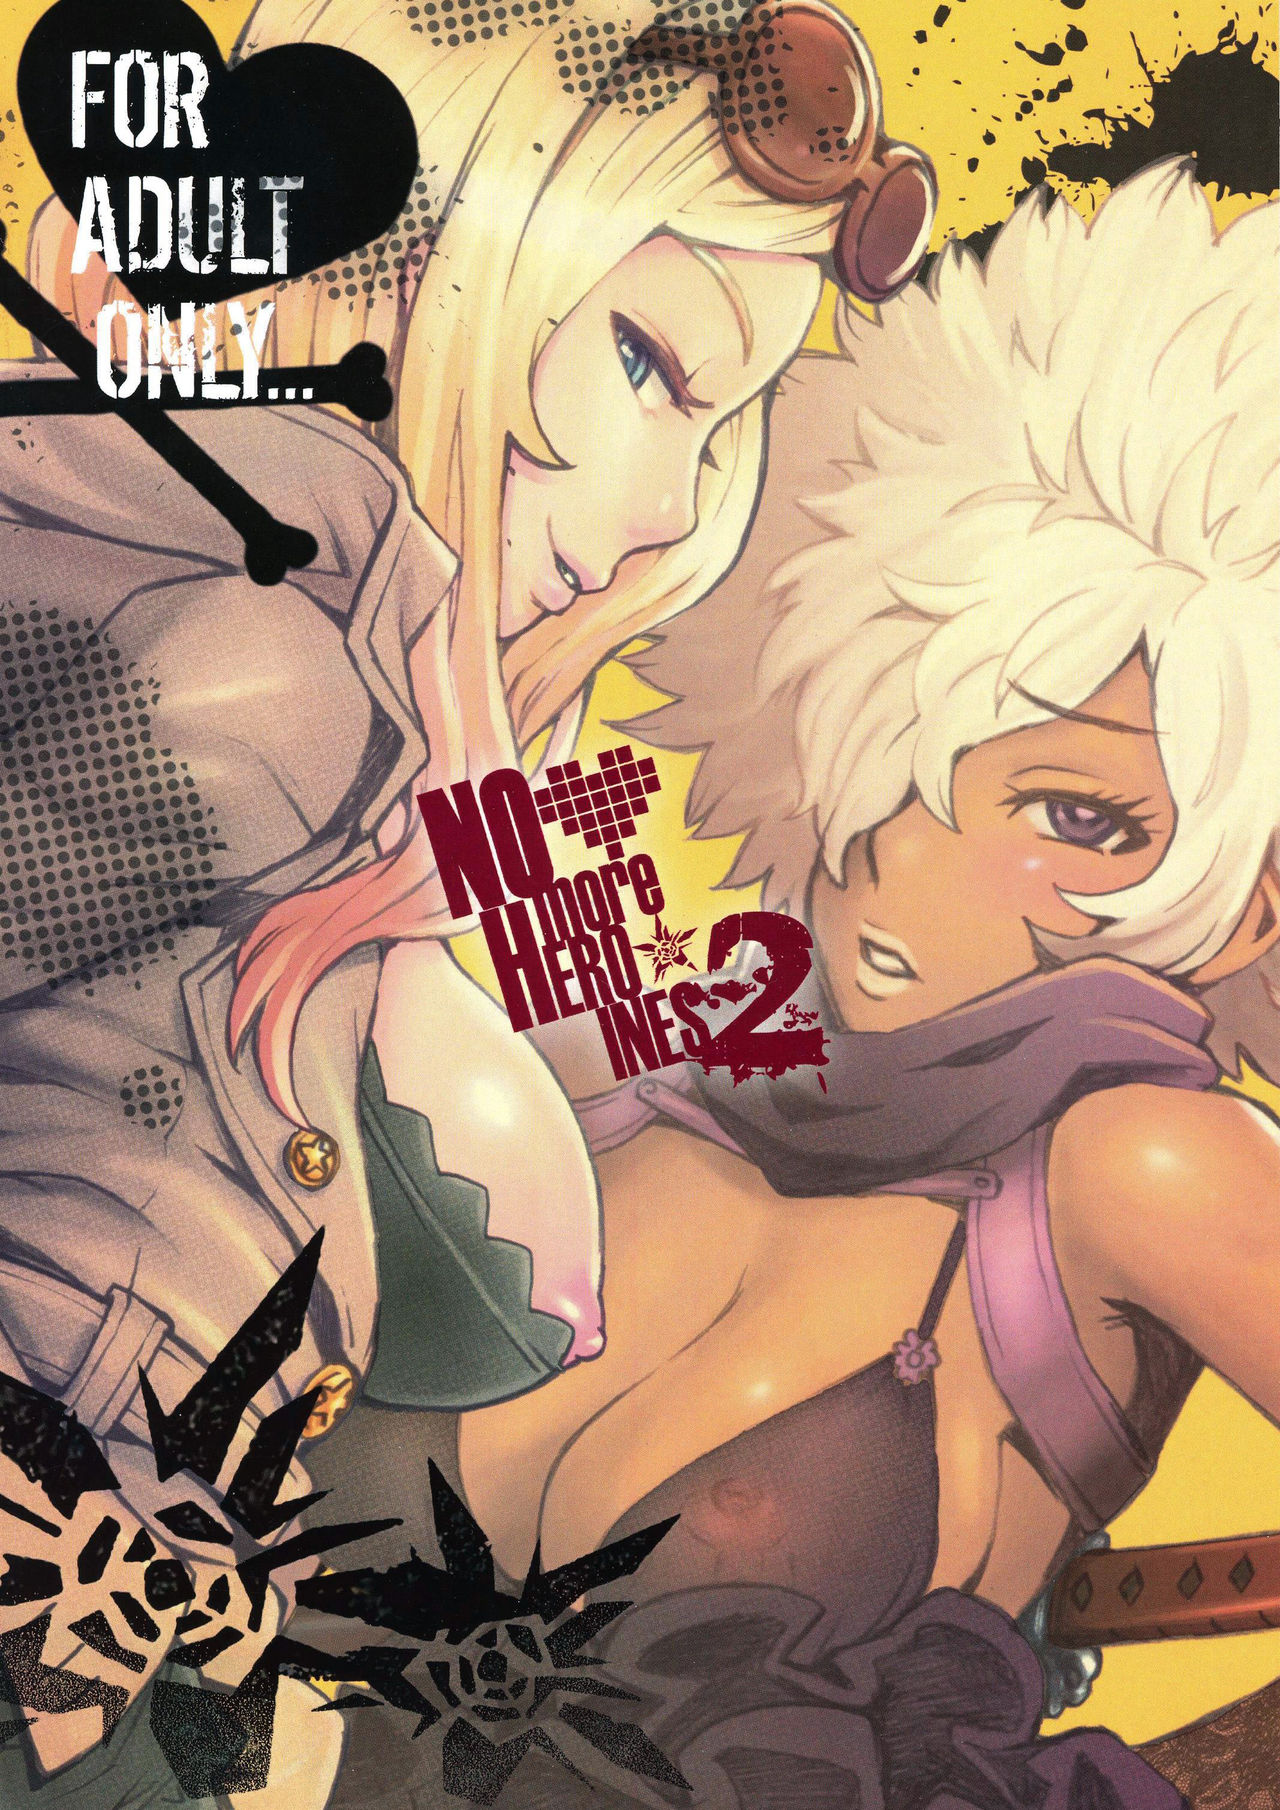 (C79) [Eight Beat (Itou Eight)] NO MORE HEROINES 2 (NO MORE HEROES) [Chinese] [黑条汉化] (C79) [エイトビート (伊藤エイト)] NO MORE HEROINES 2 (ノーモア★ヒーローズ) [中国翻訳]